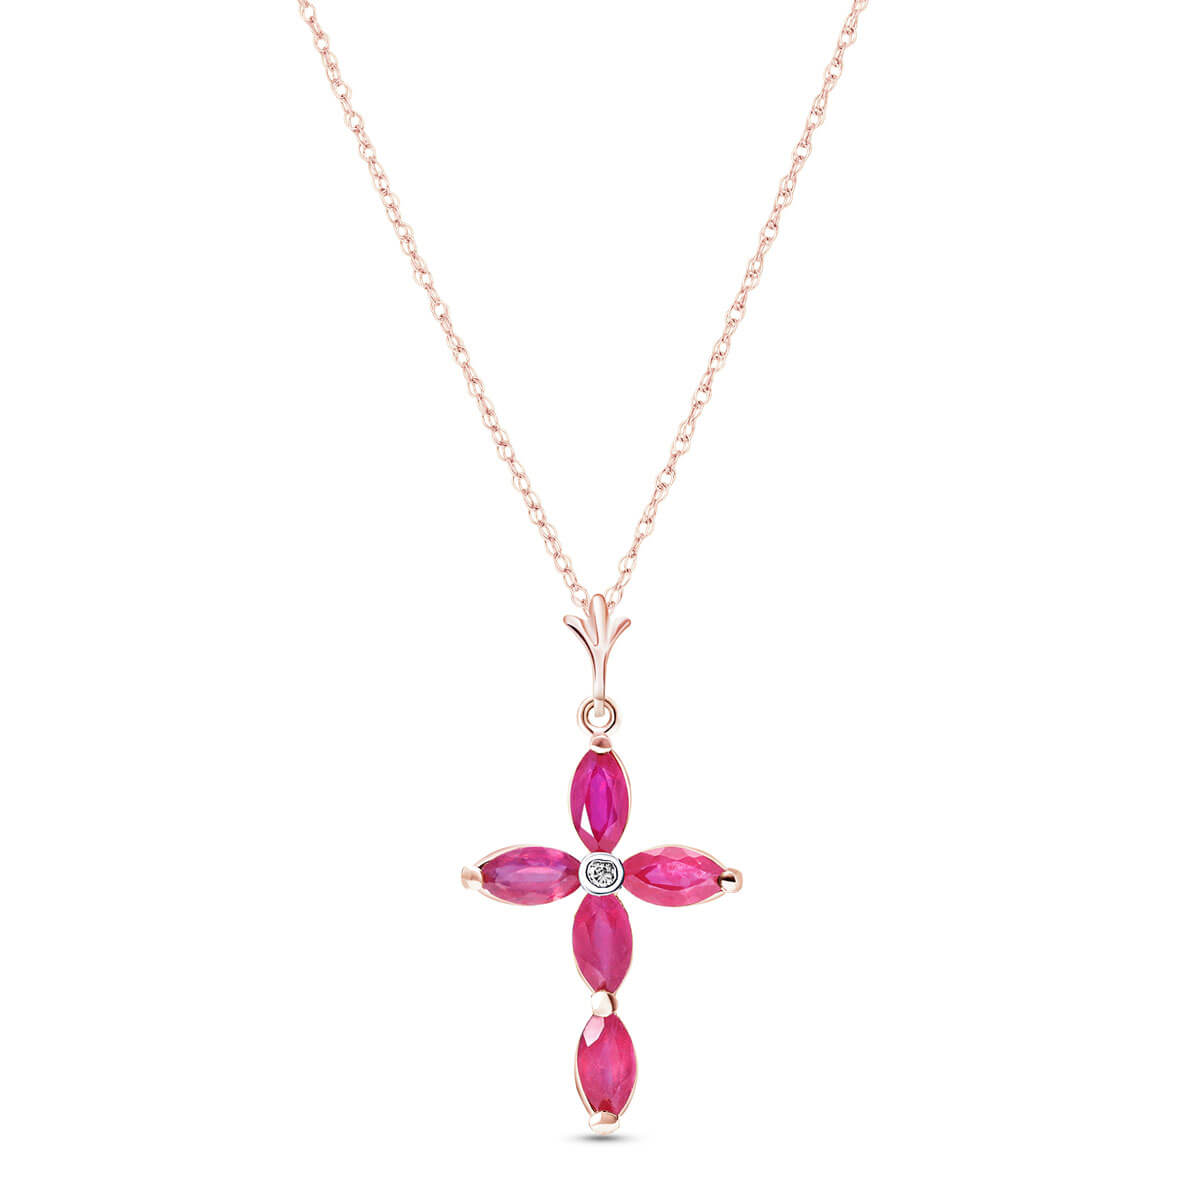 Ruby & Diamond Vatican Cross Pendant Necklace in 9ct Rose Gold